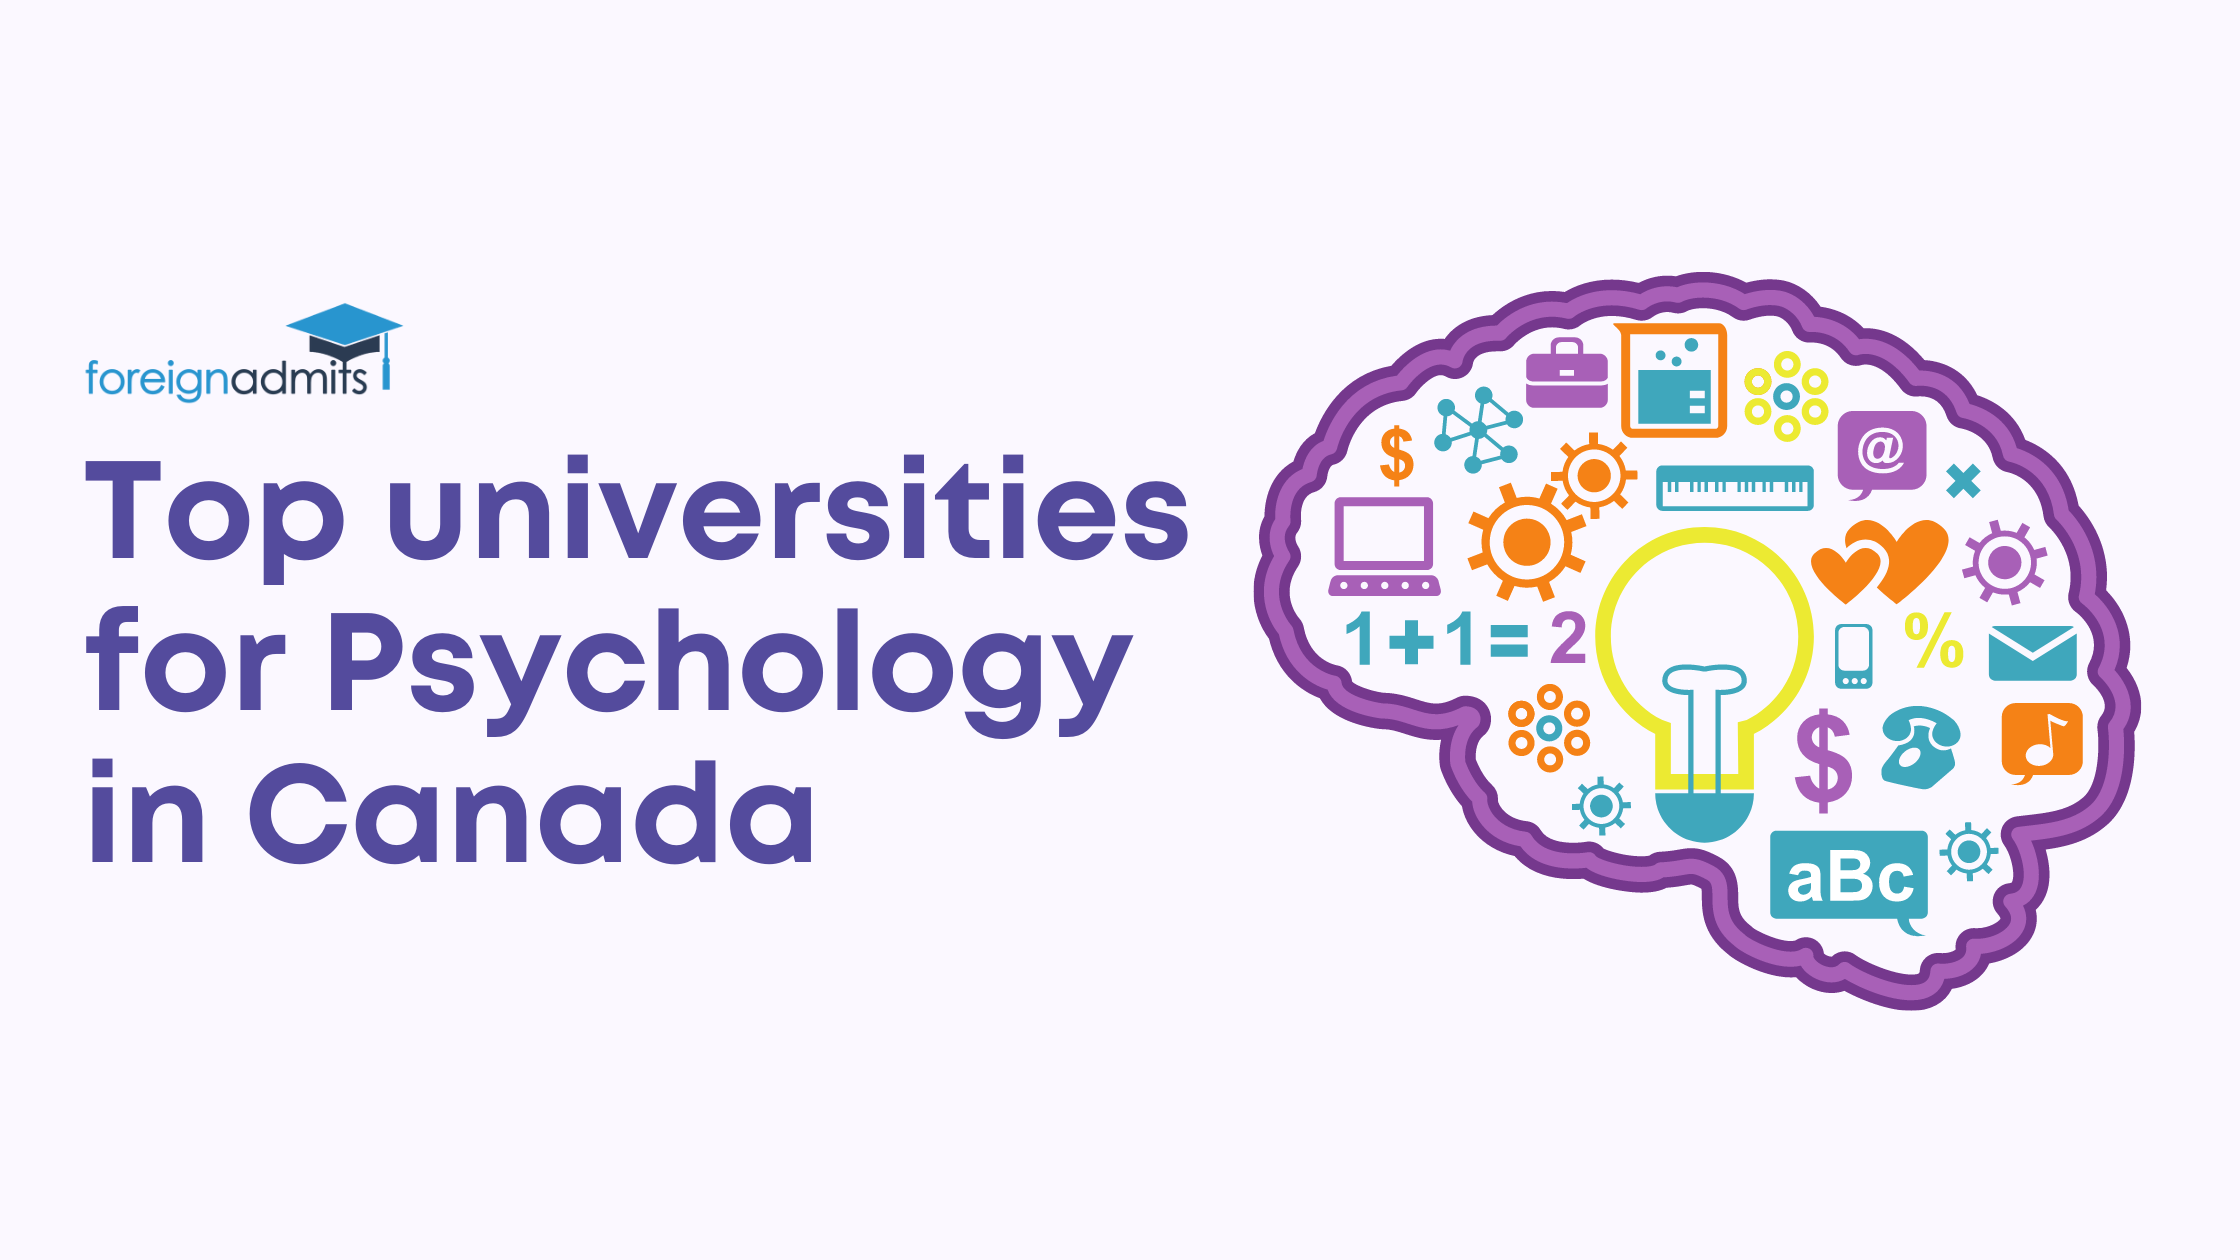 Top universities for Psychology in Canada